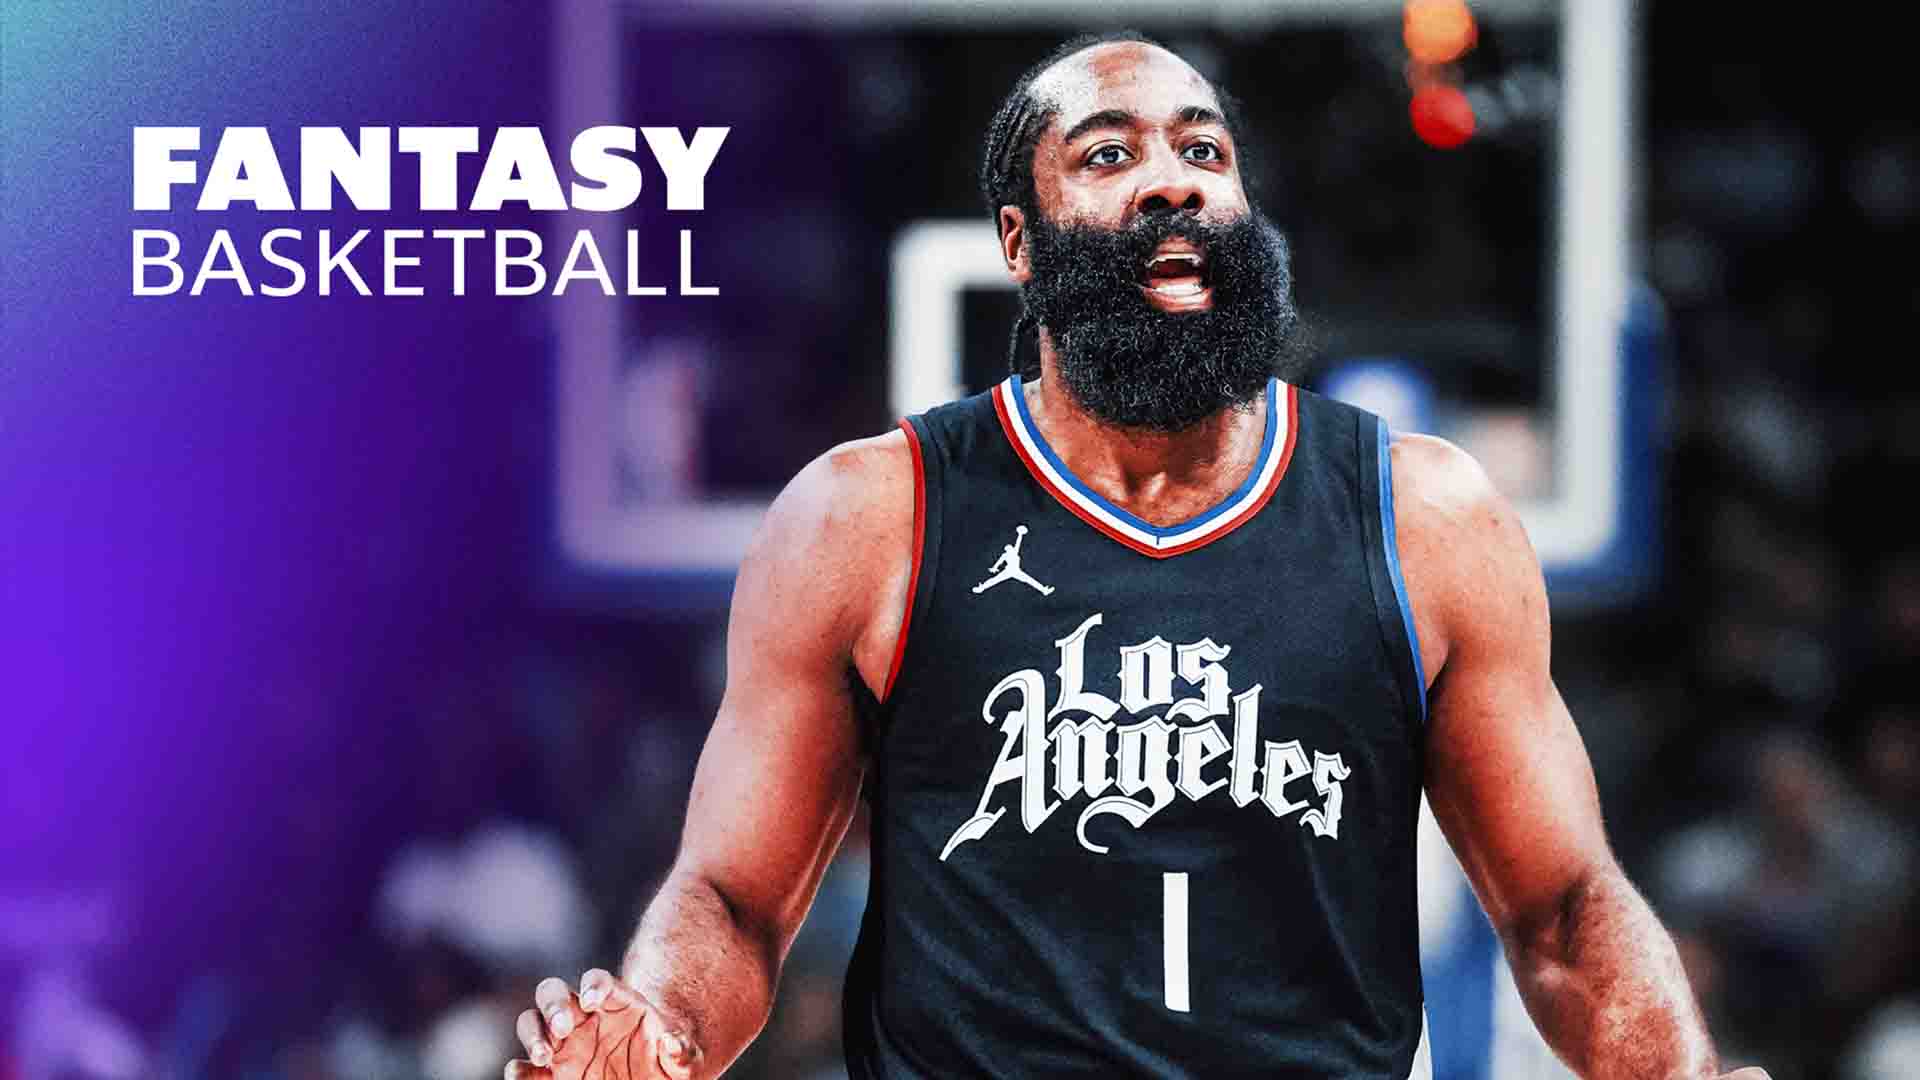 Fantasy Basketball - Winners & losers of James Harden trade